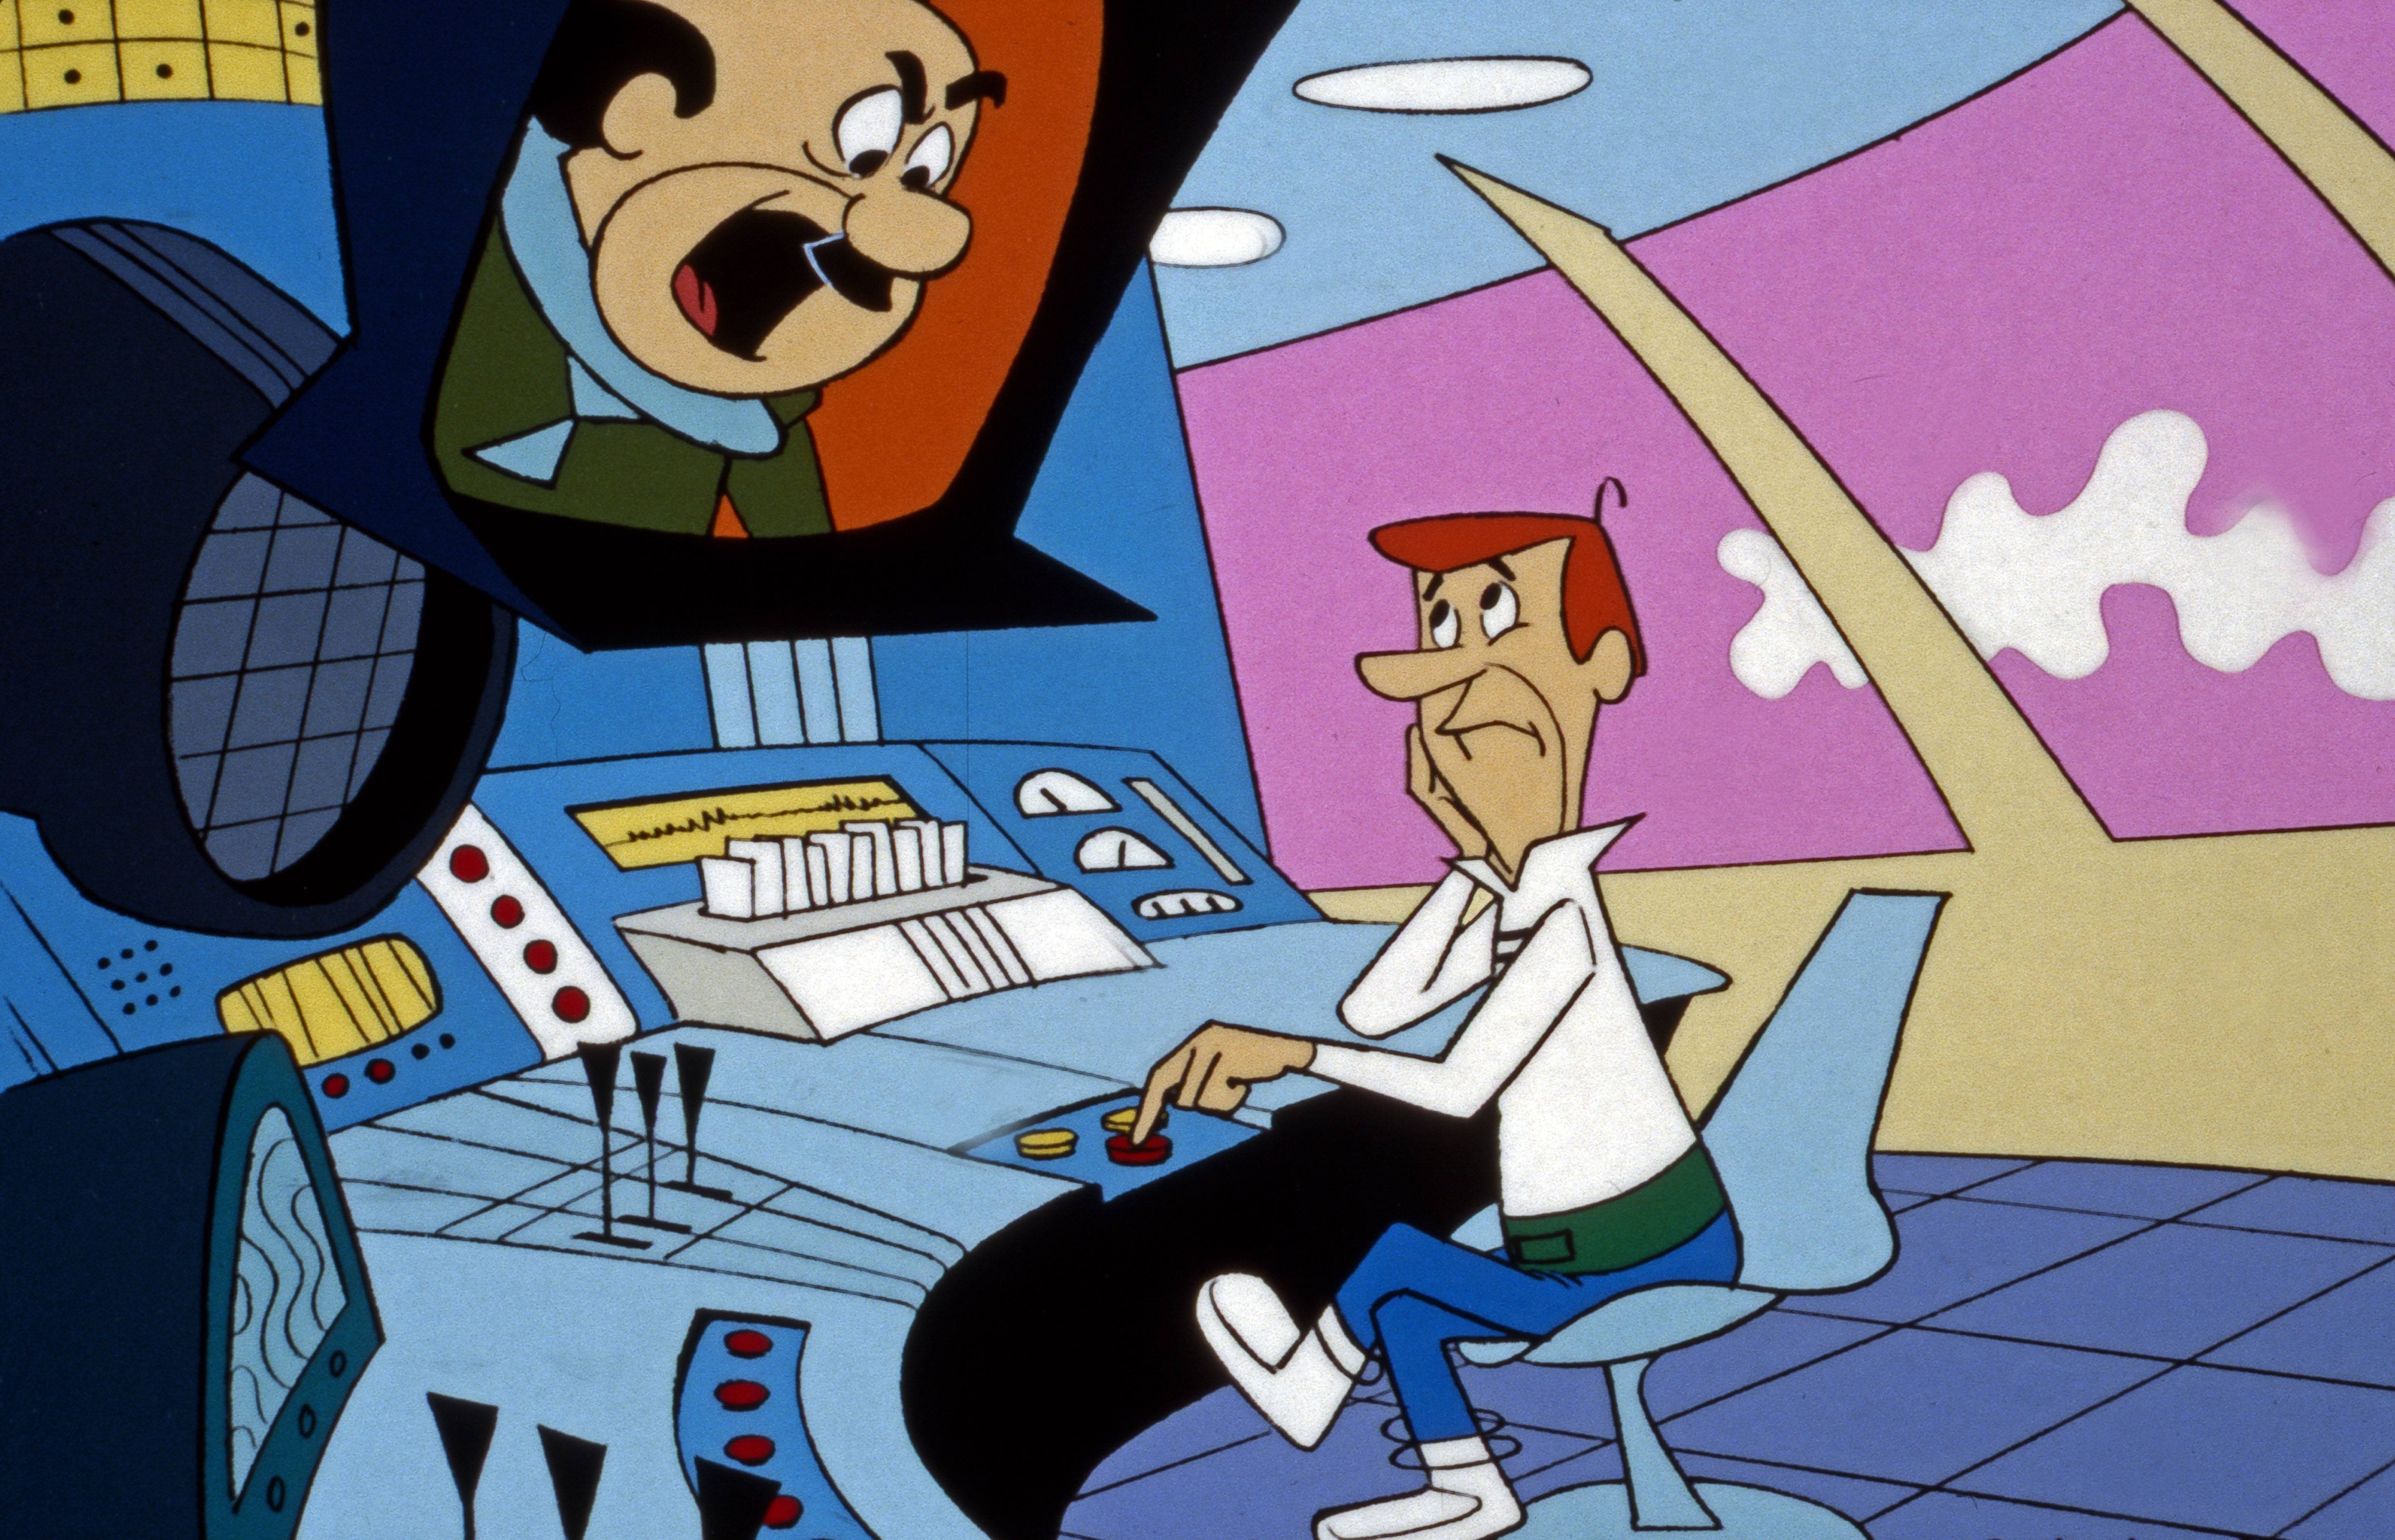 George Jetson sits in front of an elaborate console of buttons and levers, his finger hovering over a button, as he stares with resignation at his boss who is yelling at him from a screen overhead.